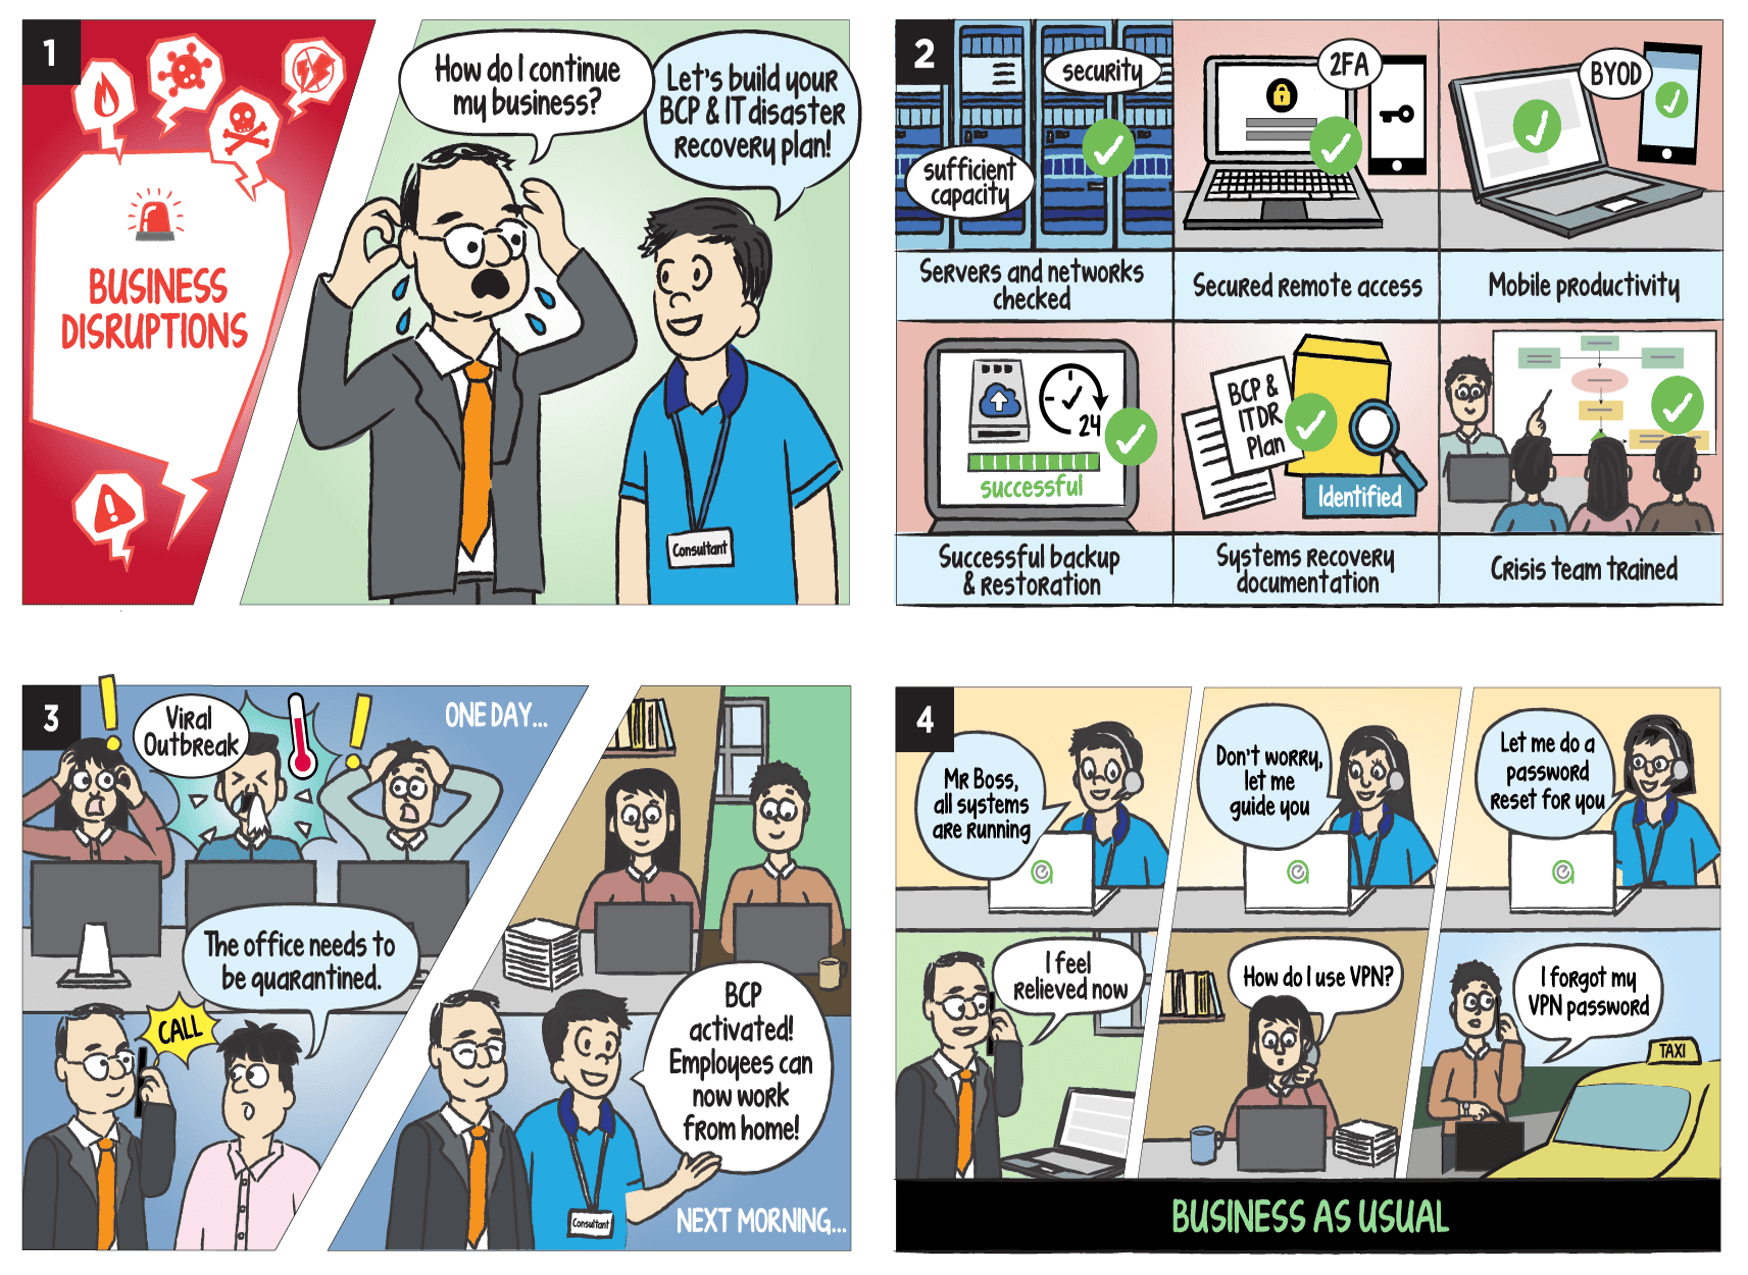 Comic strip illustrating how Managed Support Services can safeguard business from business disruptions